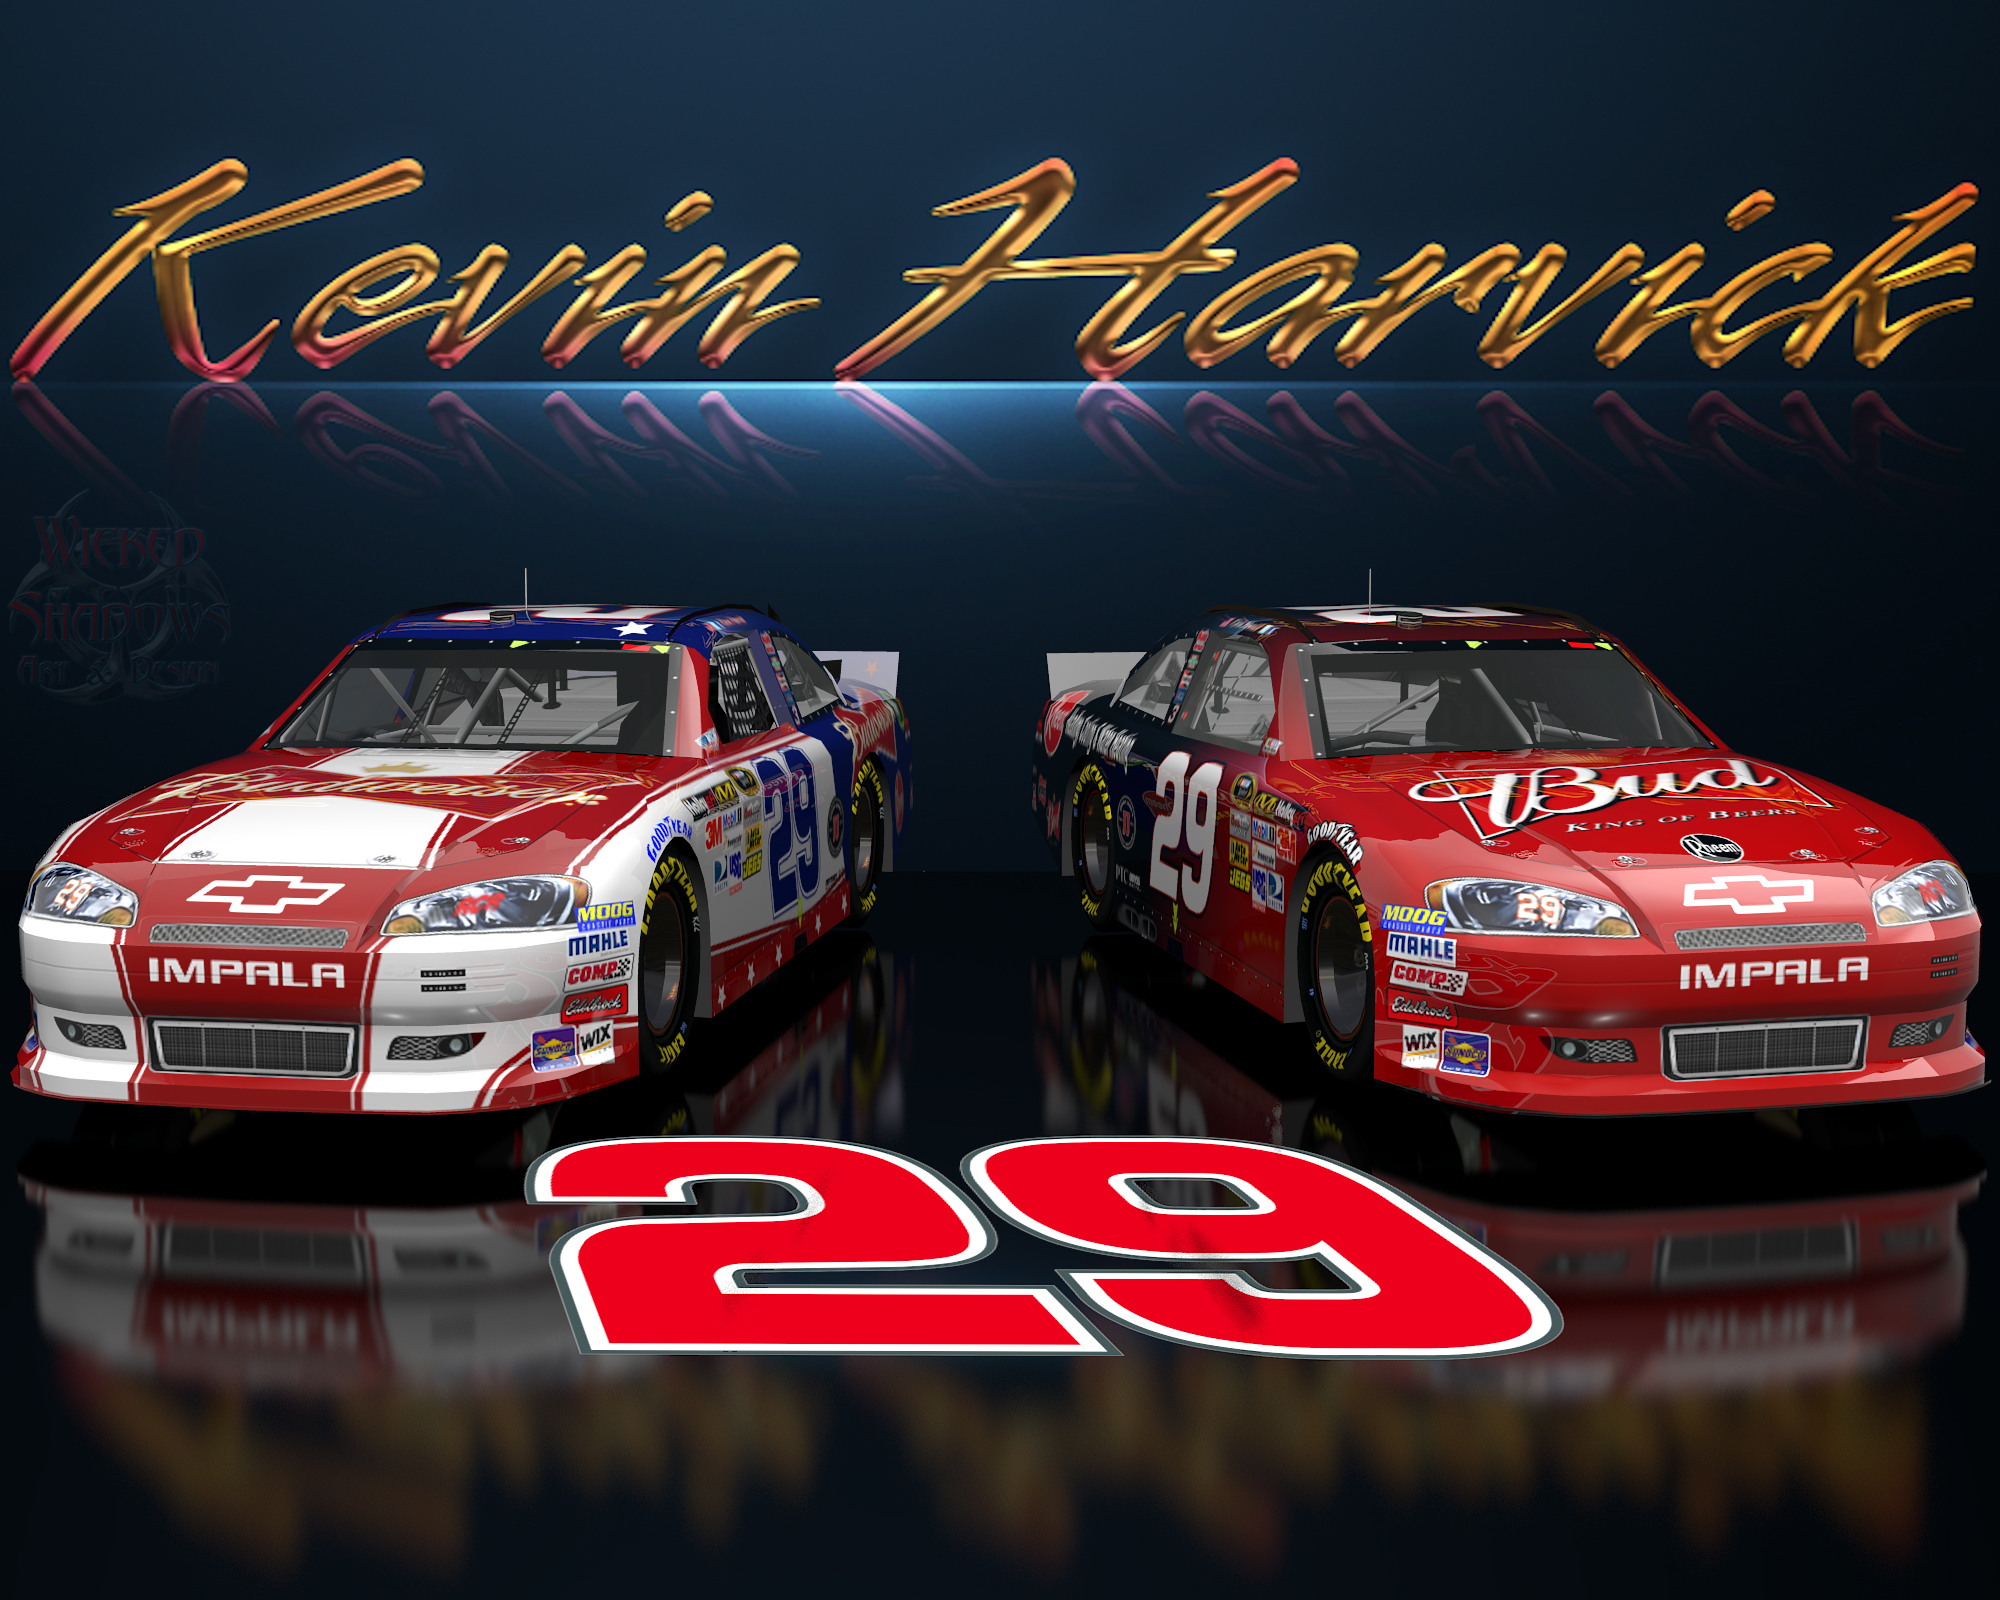 Kevin Harvick Budweiser Wicked Text Wallpaper World News